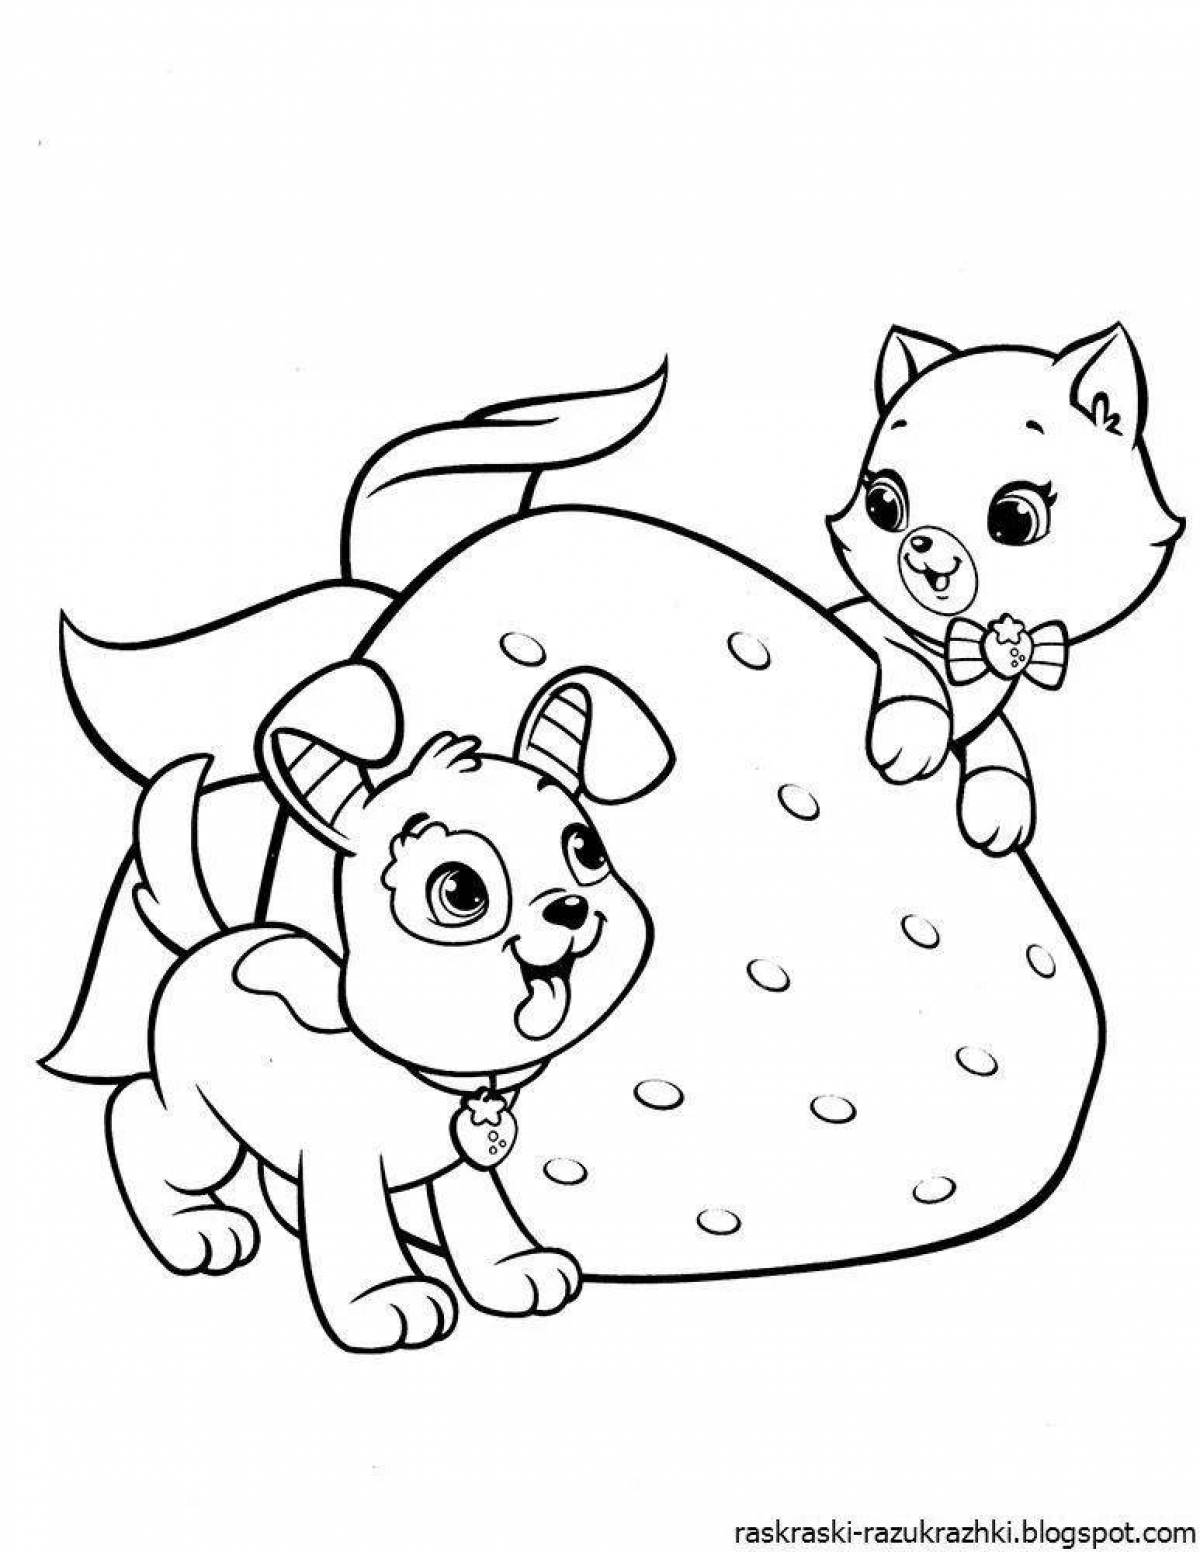 Adorable kittens and puppies coloring book